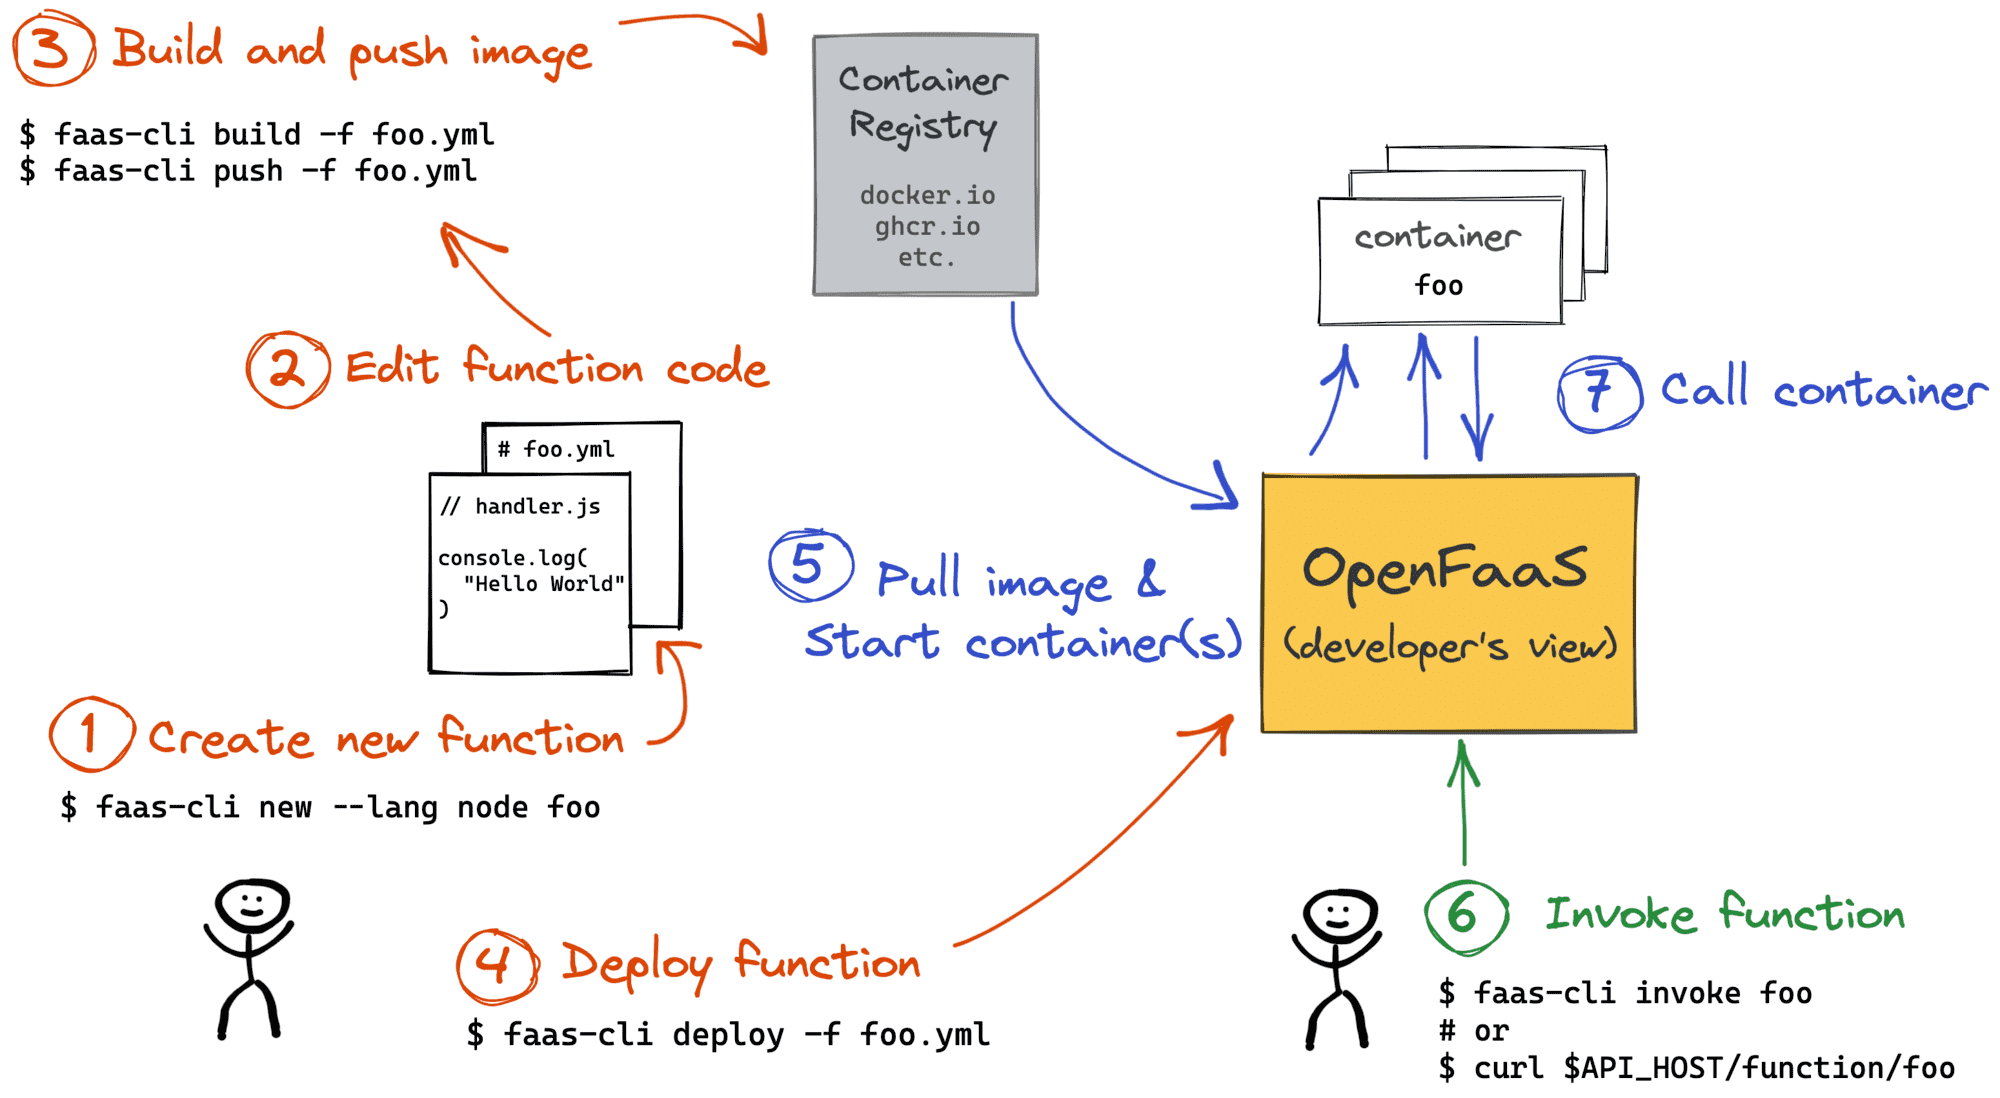 Building and Deploying Functions